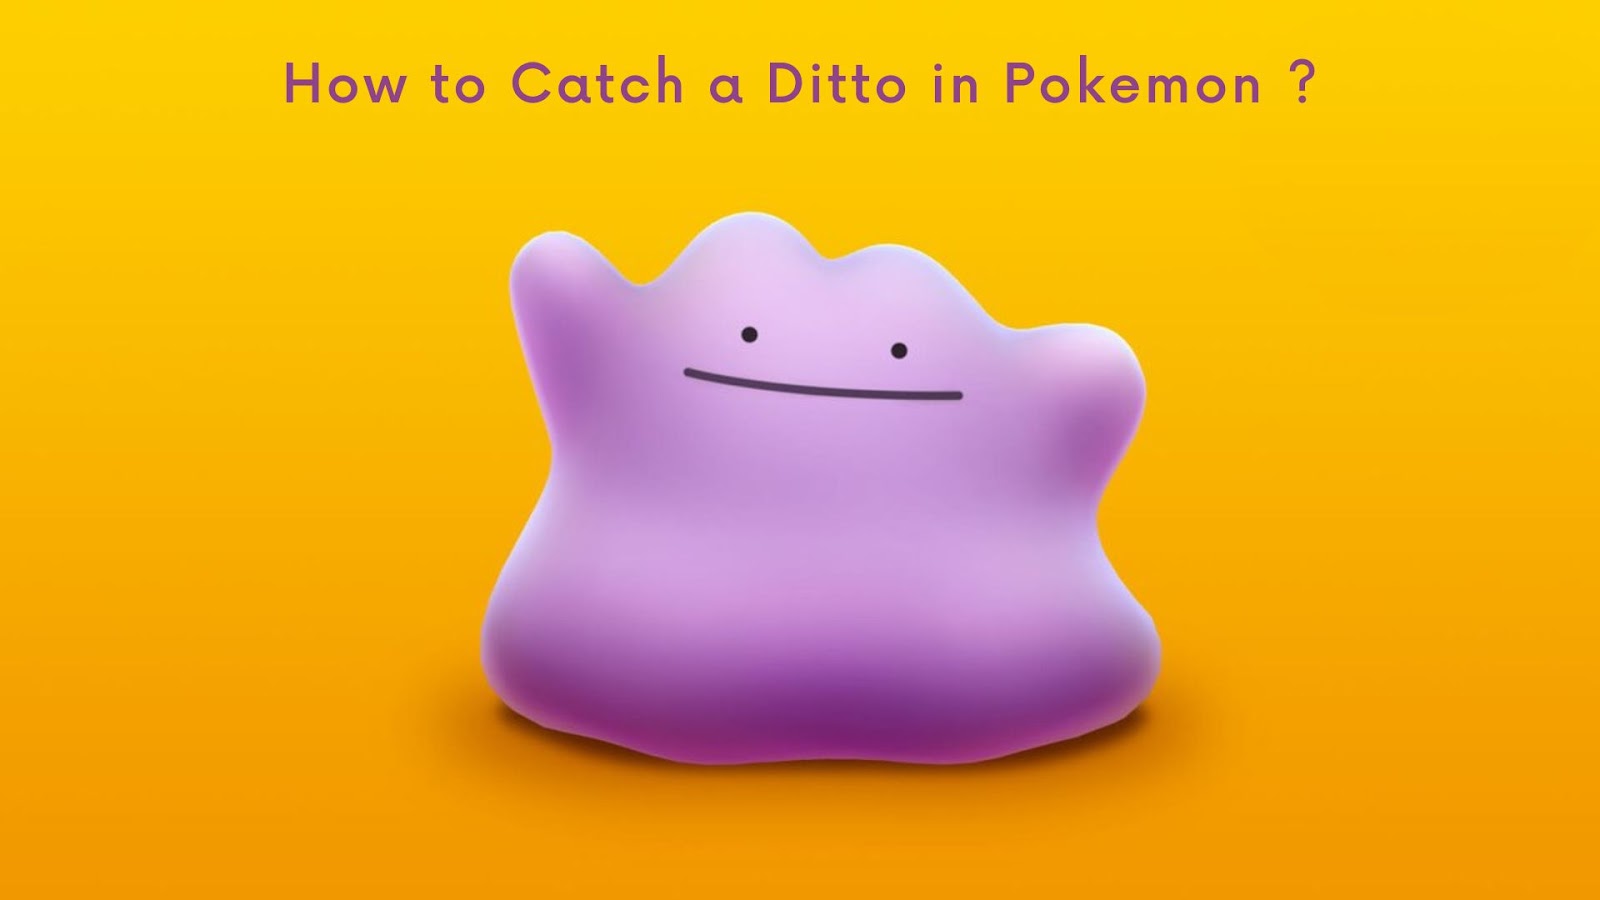 How to Catch a Ditto in Pokemon?